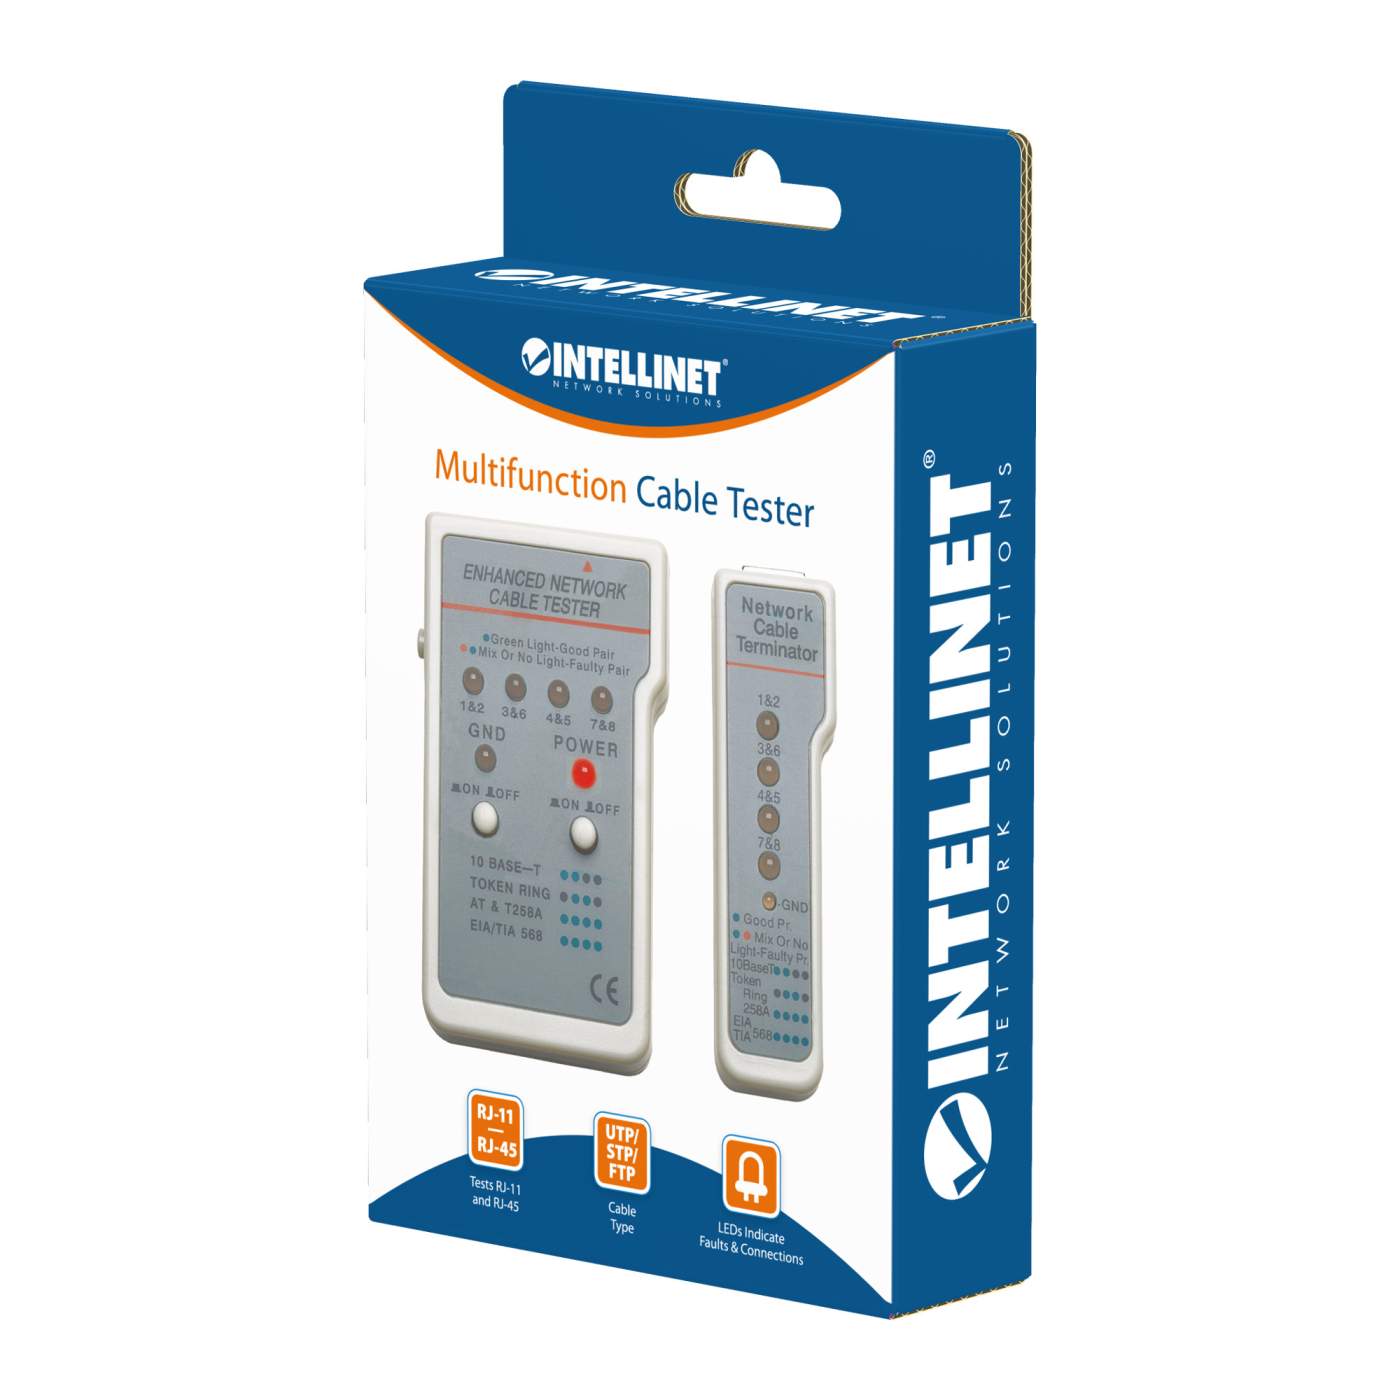 Multifunction Cable Tester Packaging Image 2